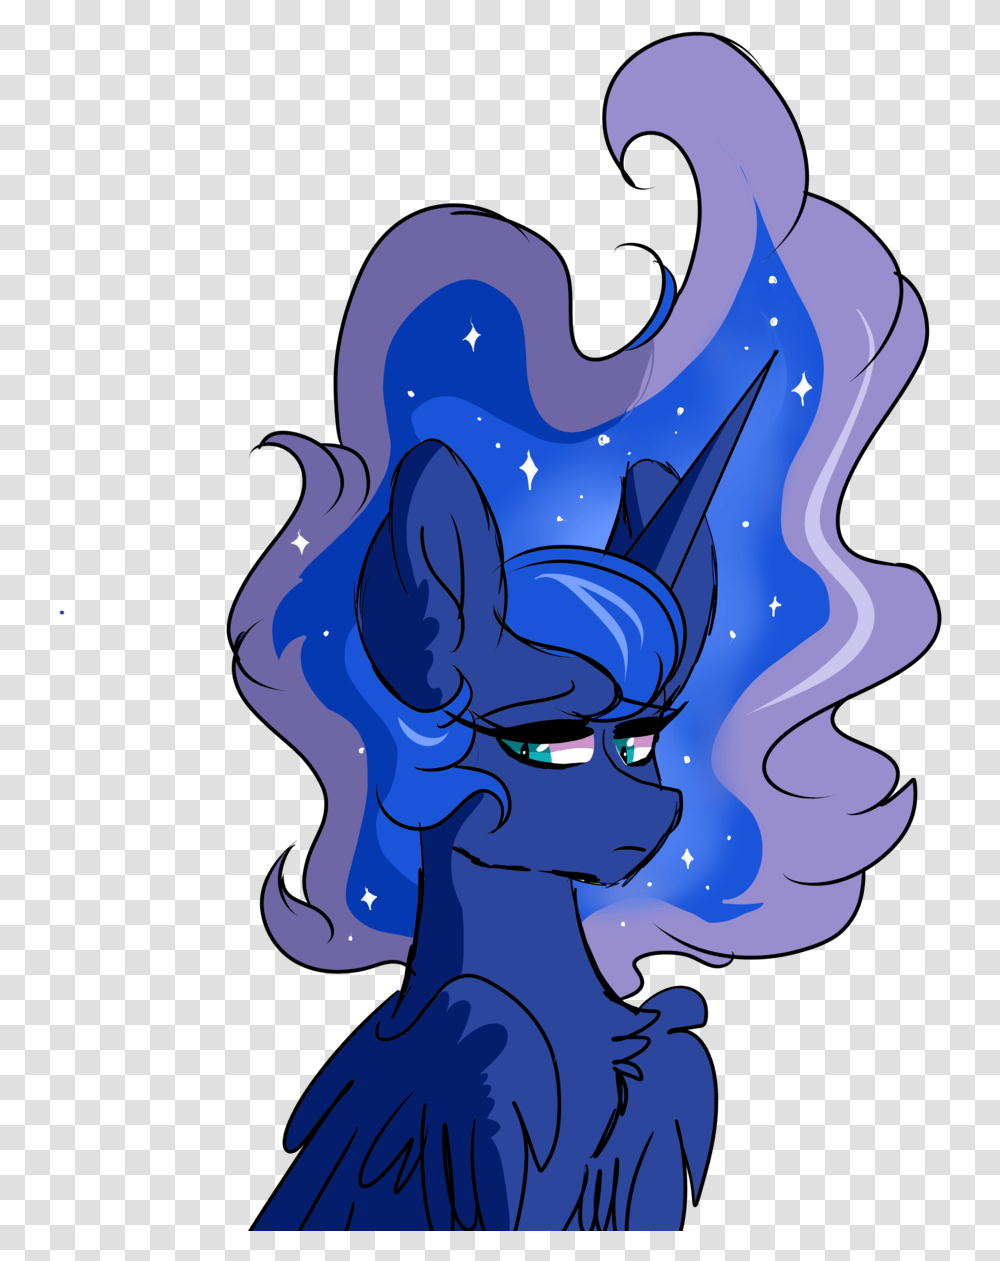 The Night Sky By Scarletskitty12 The Night Sky By Scarletskitty12 Cartoon, Outdoors, Ice, Nature Transparent Png